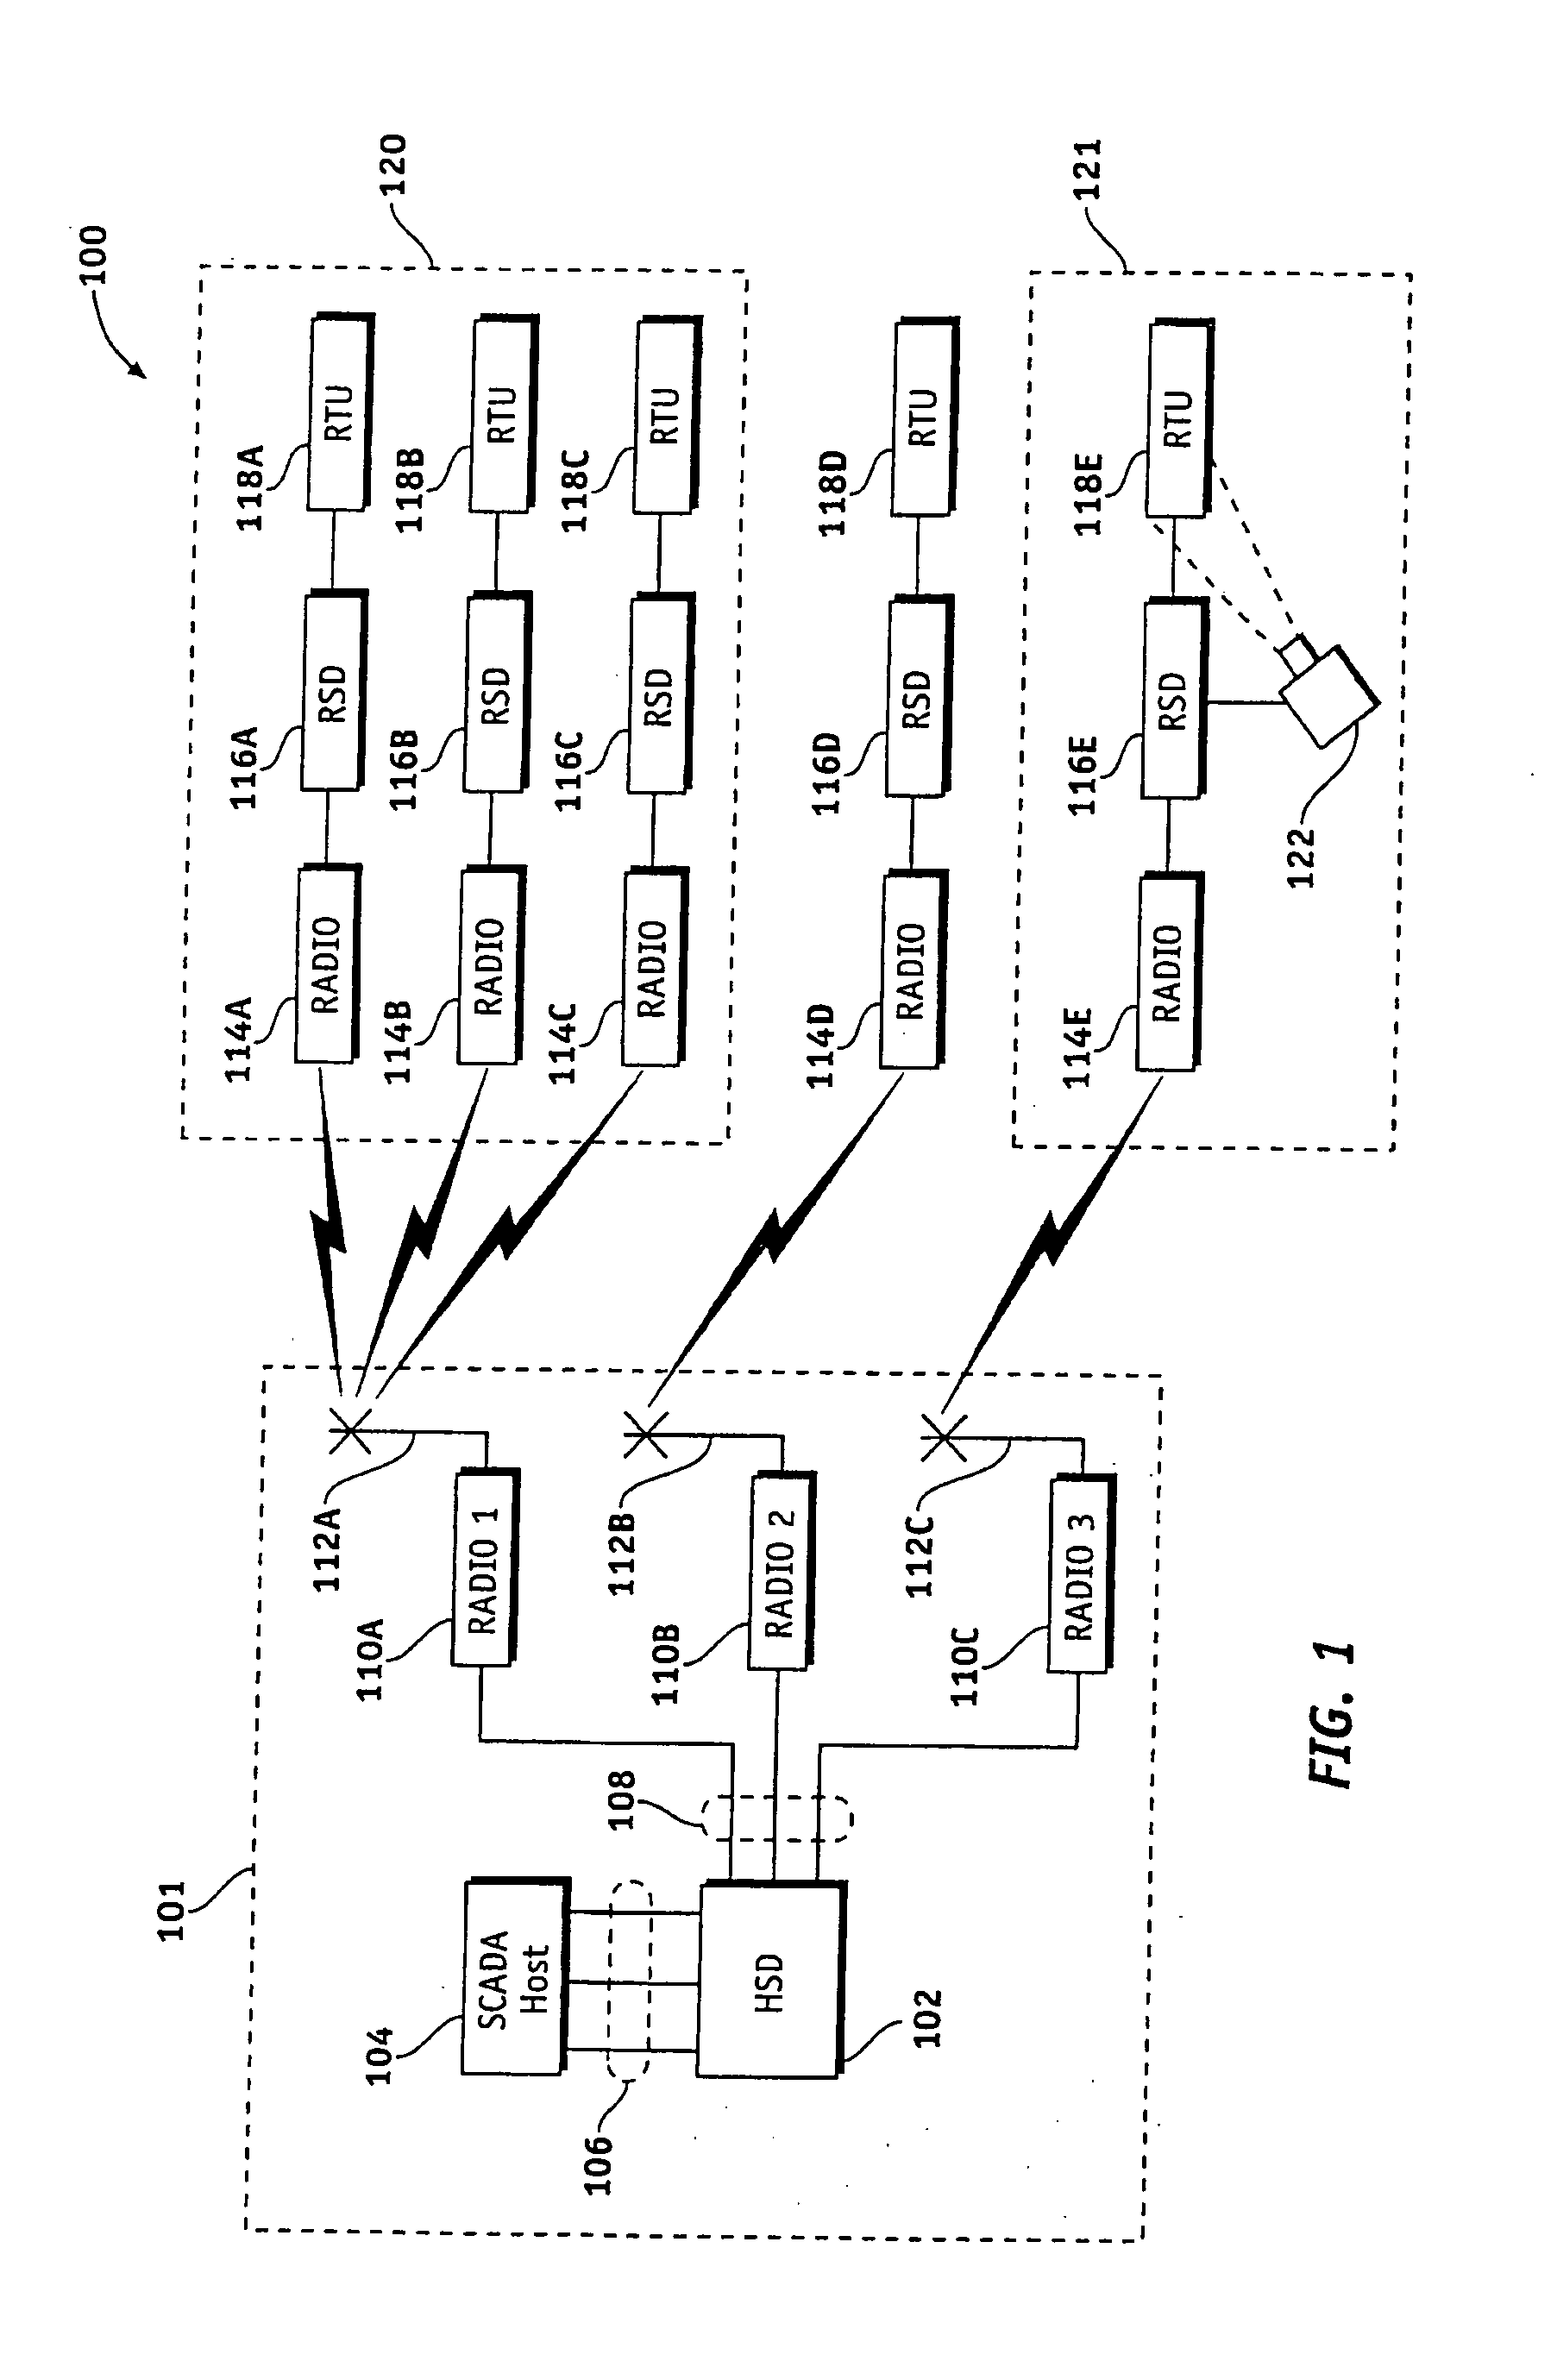 Methods, systems and devices for securing supervisory control and data acquisition (SCADA) communications